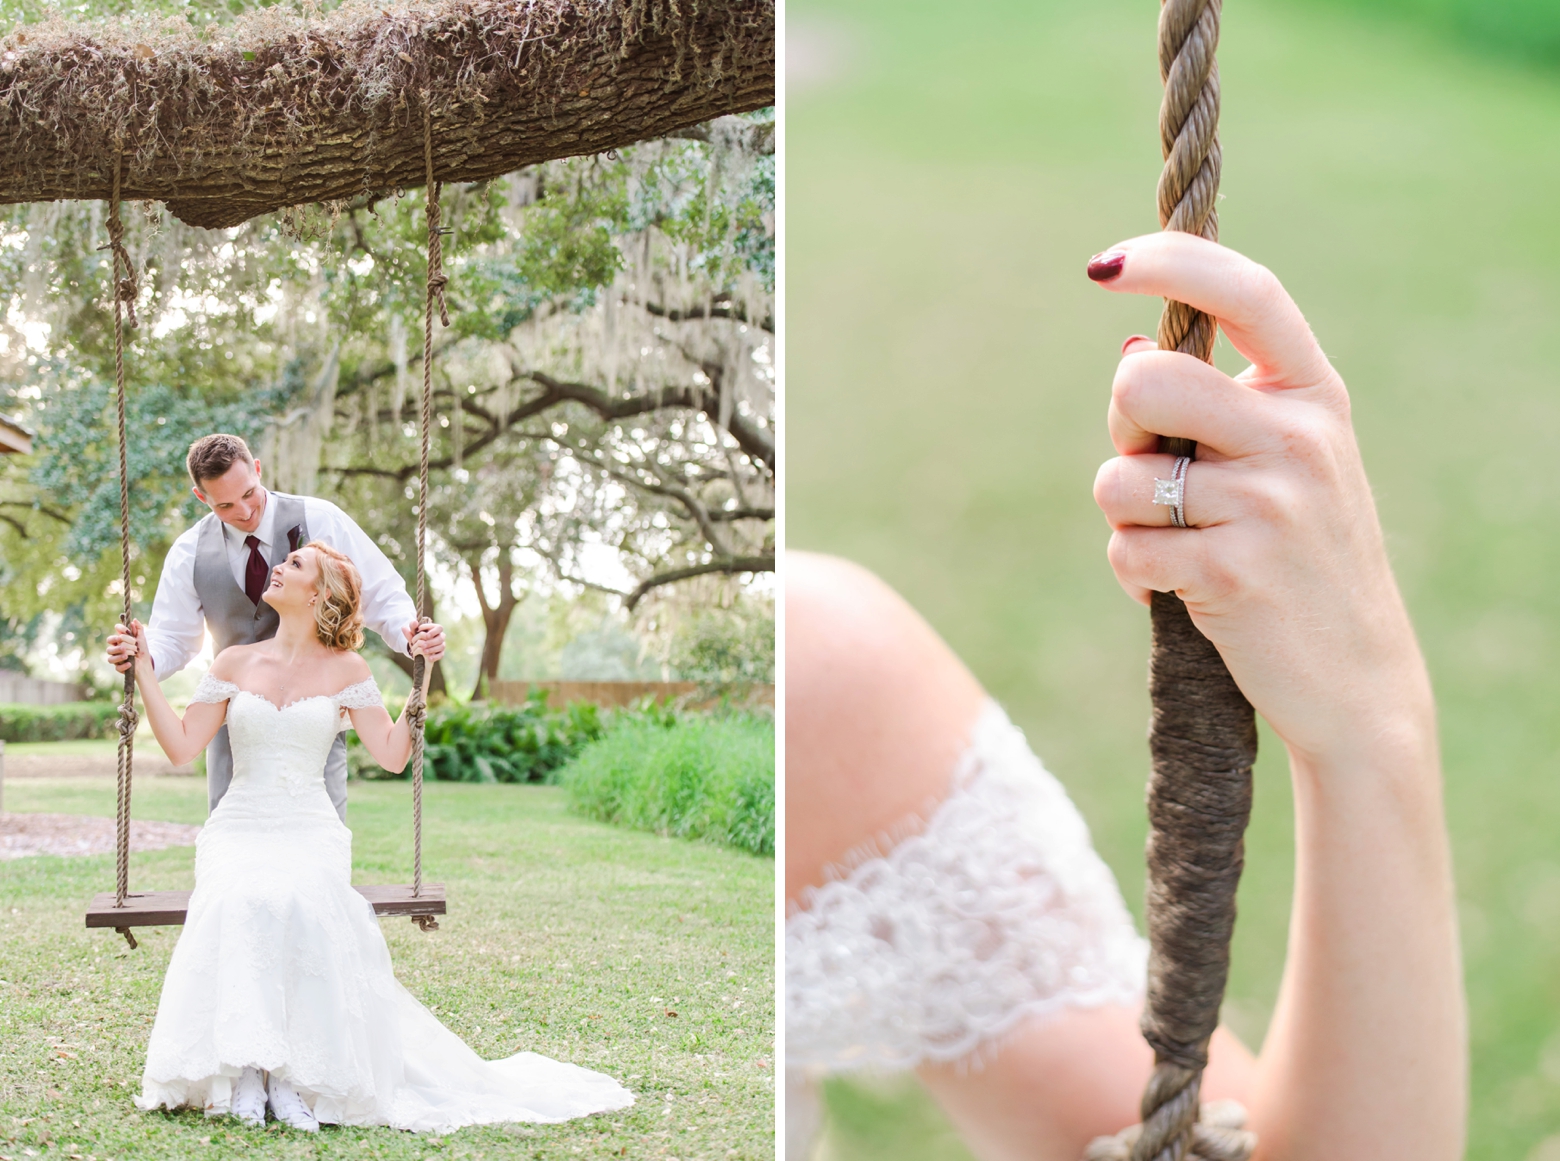 Bride and Groom take some time to swing on a tree swing and a close up of the wedding rings on her fingers as she holds the rope